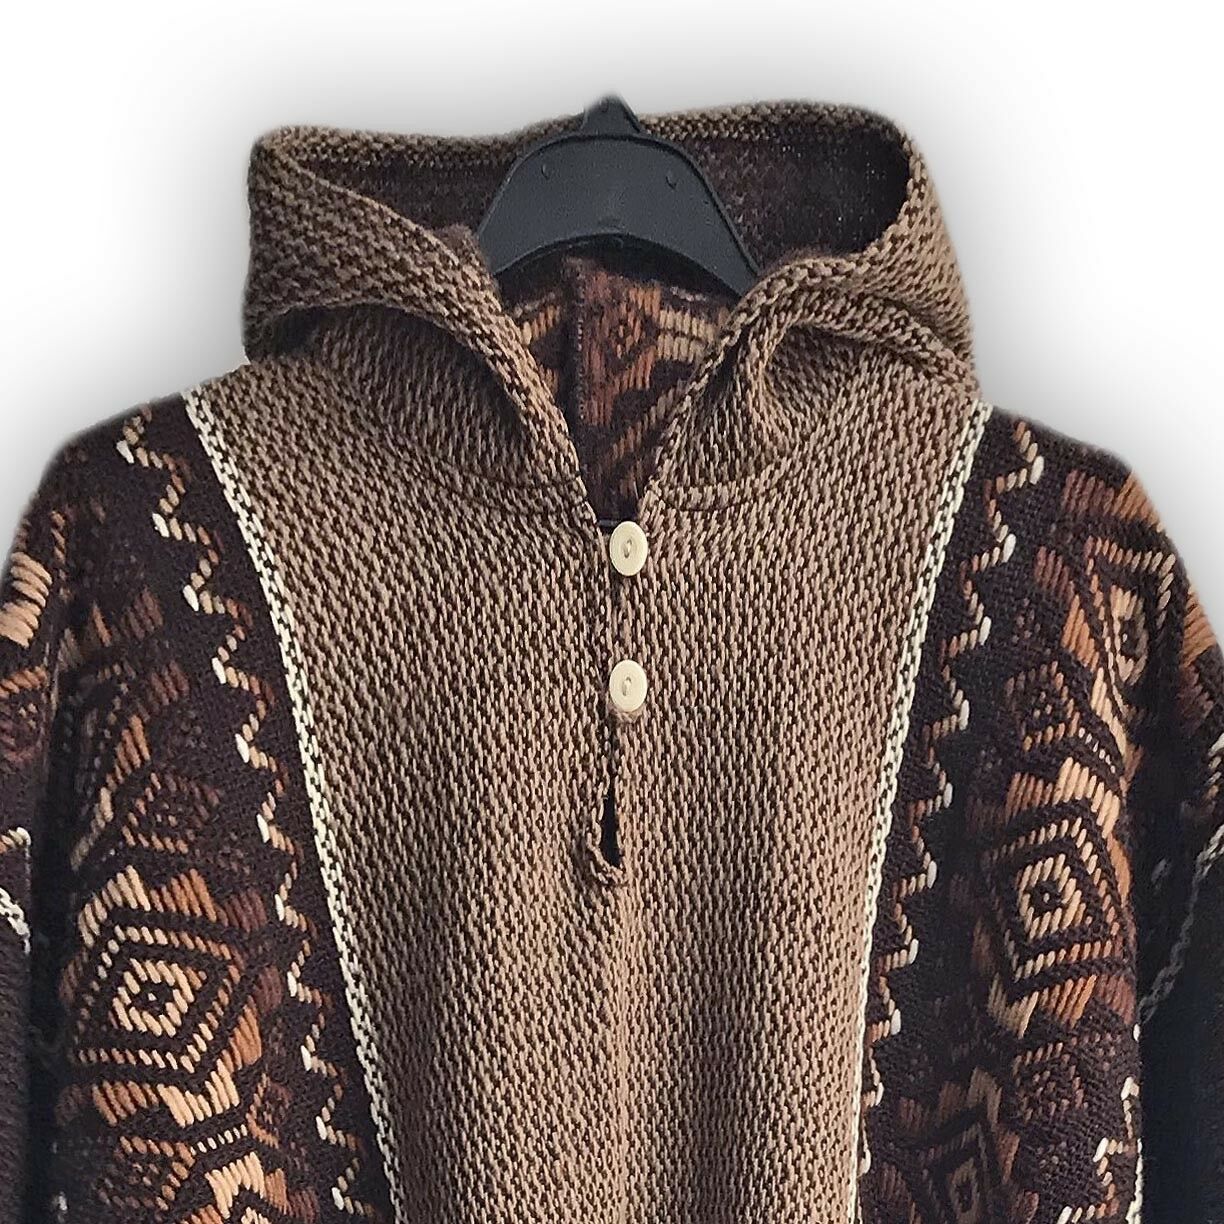 Llama Wool Unisex South American Handwoven Hooded Poncho - solid brown with diamonds pattern